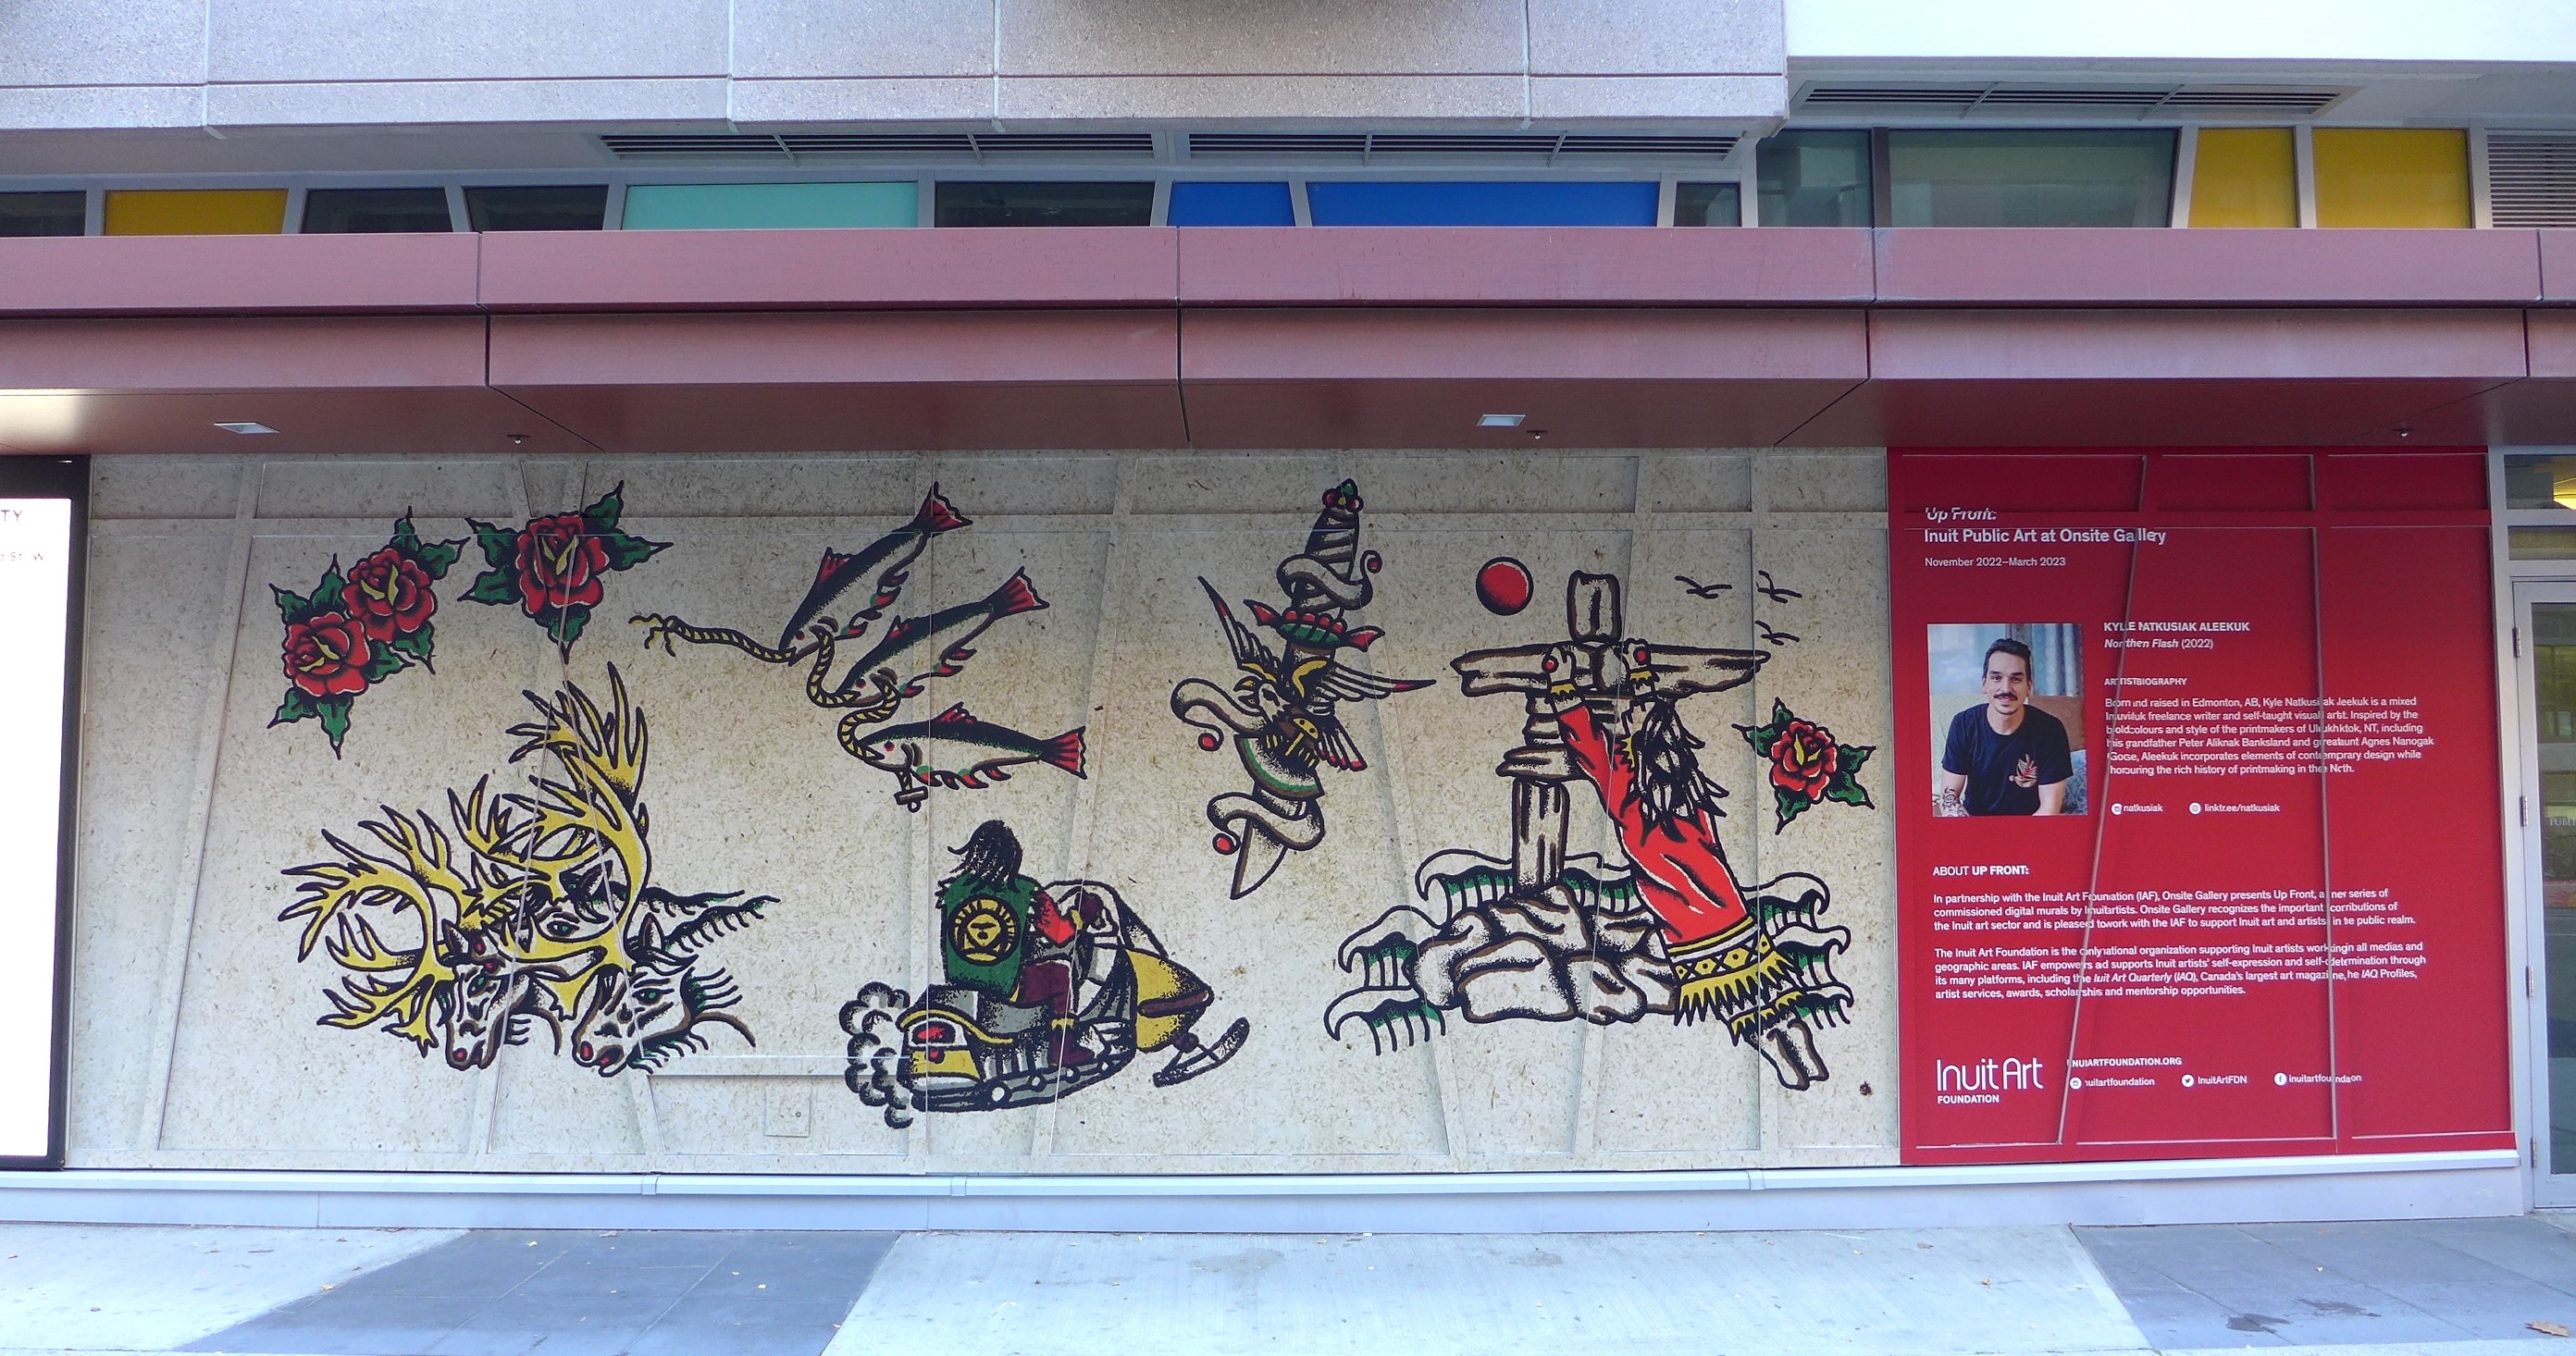 Large mural that includes colourful artwork depicting a person on a skidoo, caribou herds, fishing lines, roses and inuksuk, all set against a sepia-toned background.